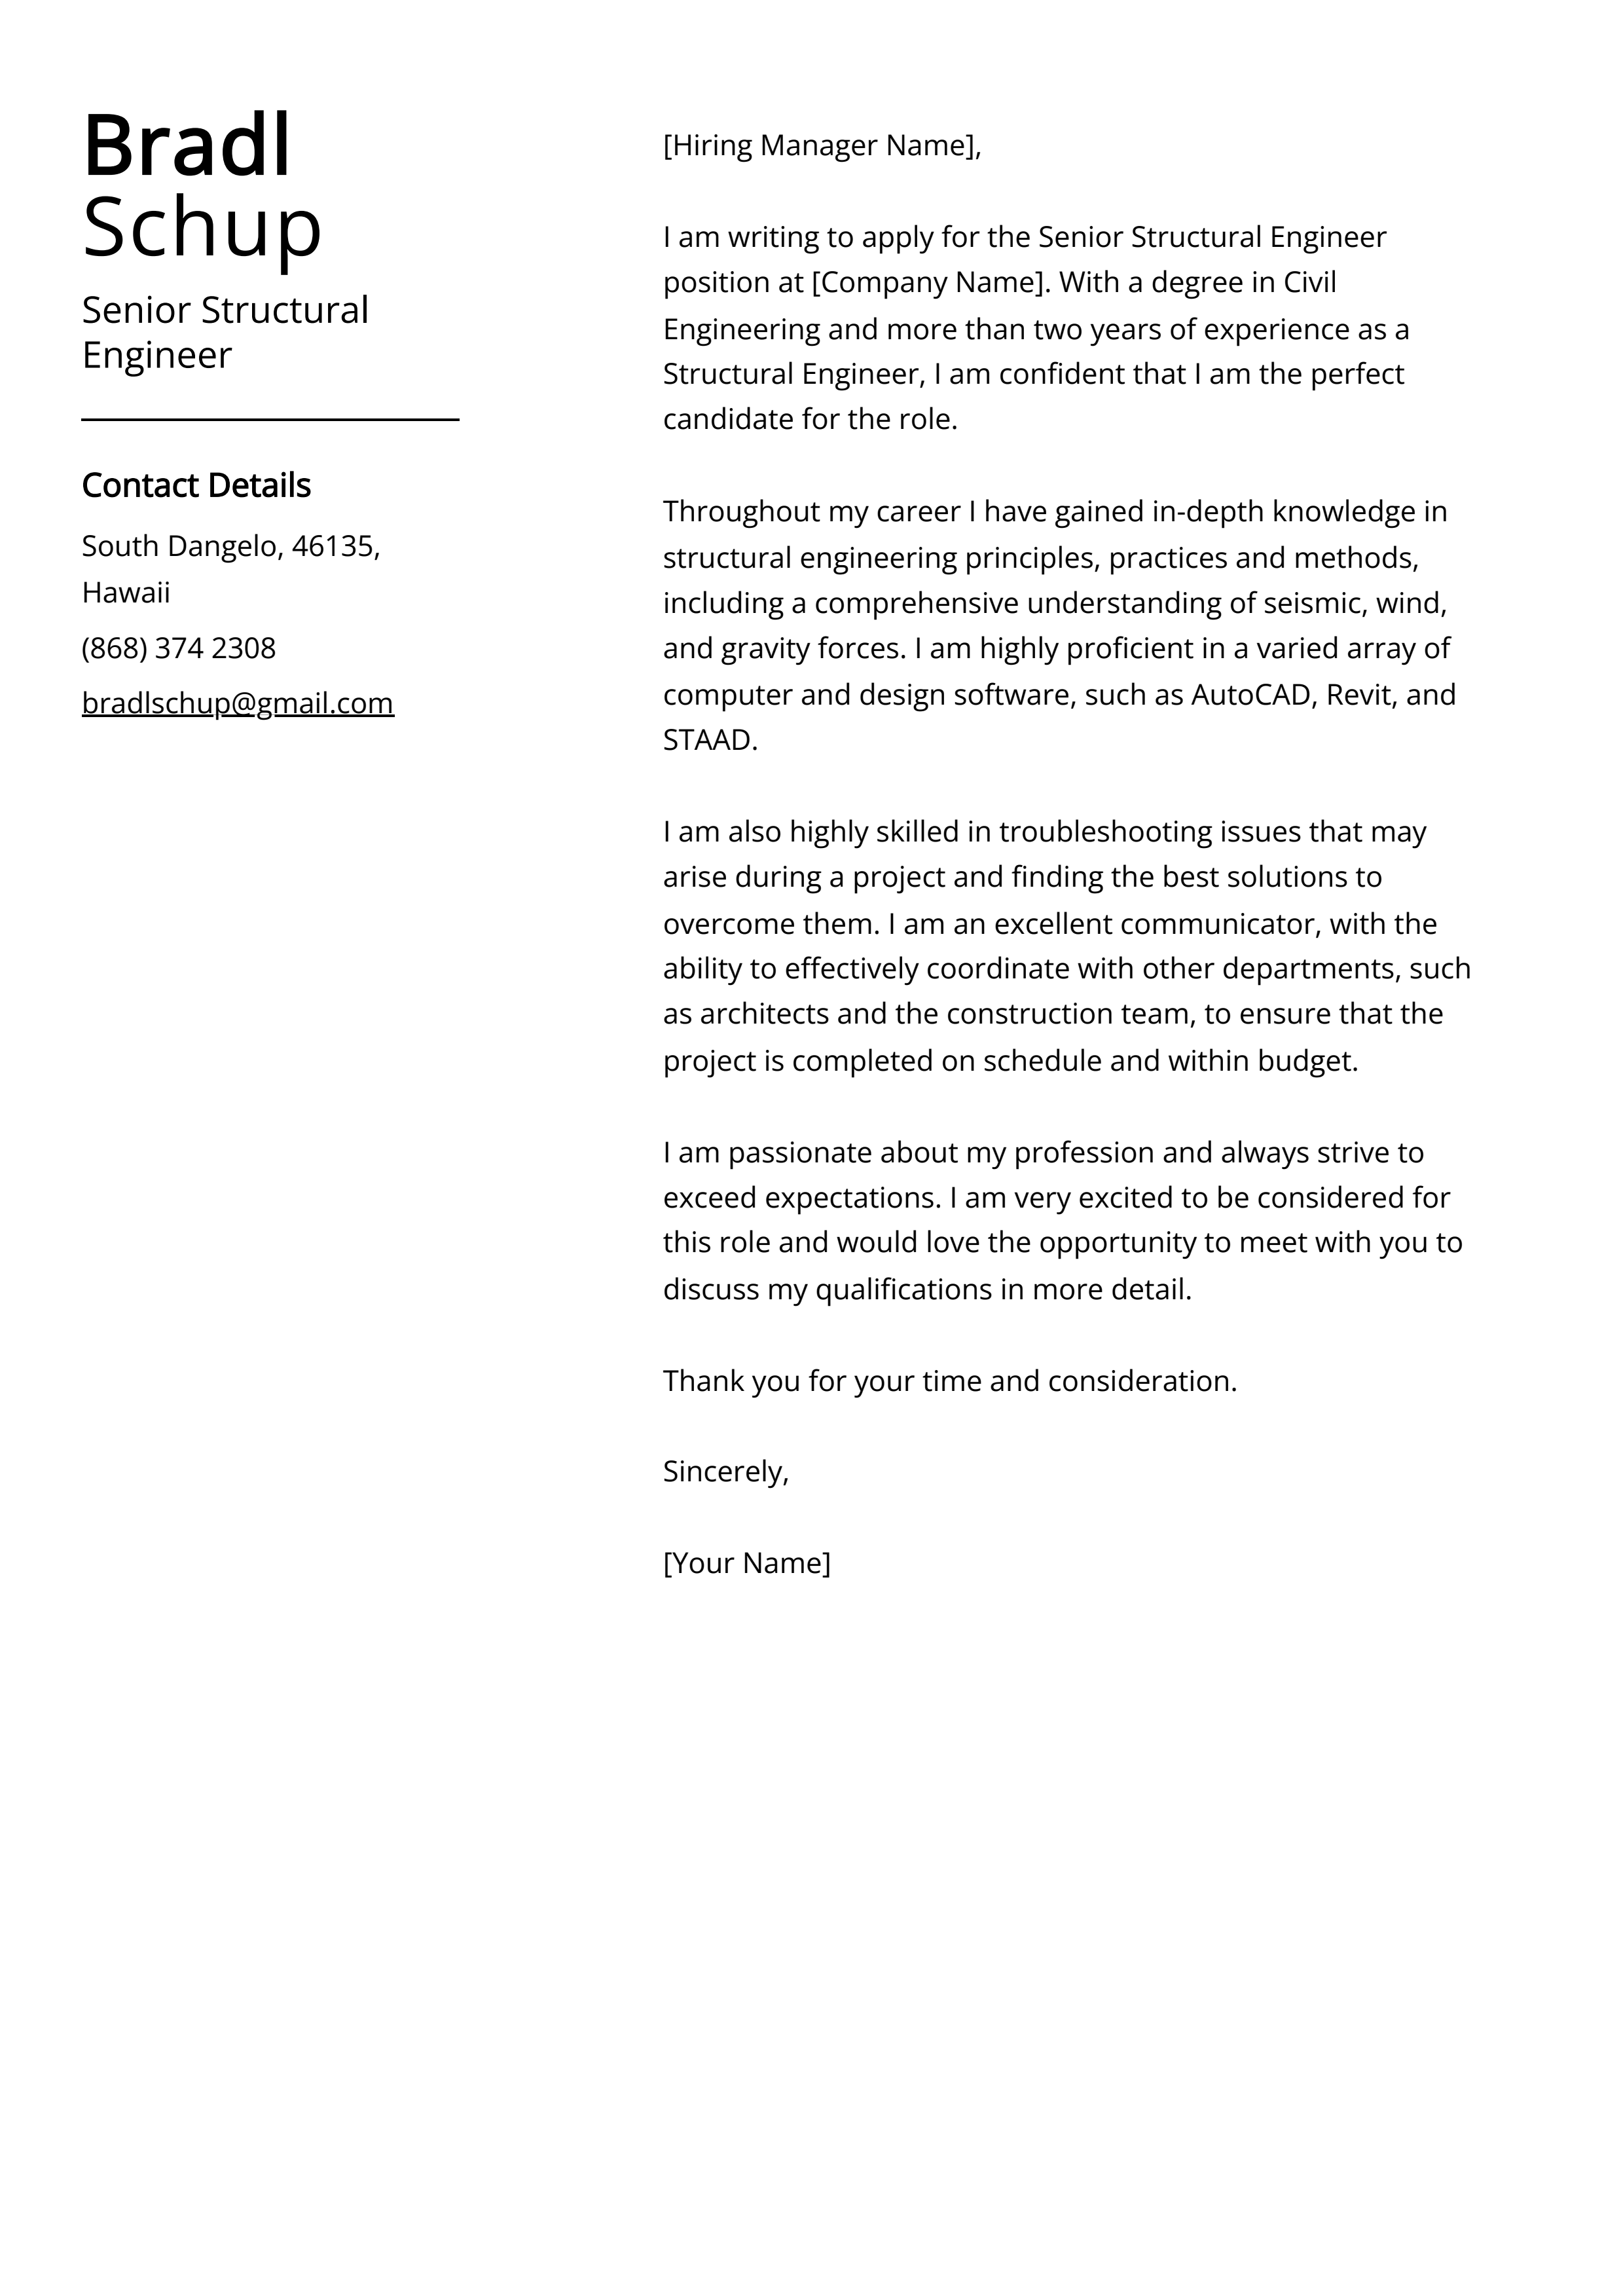 Senior Structural Engineer Cover Letter Example